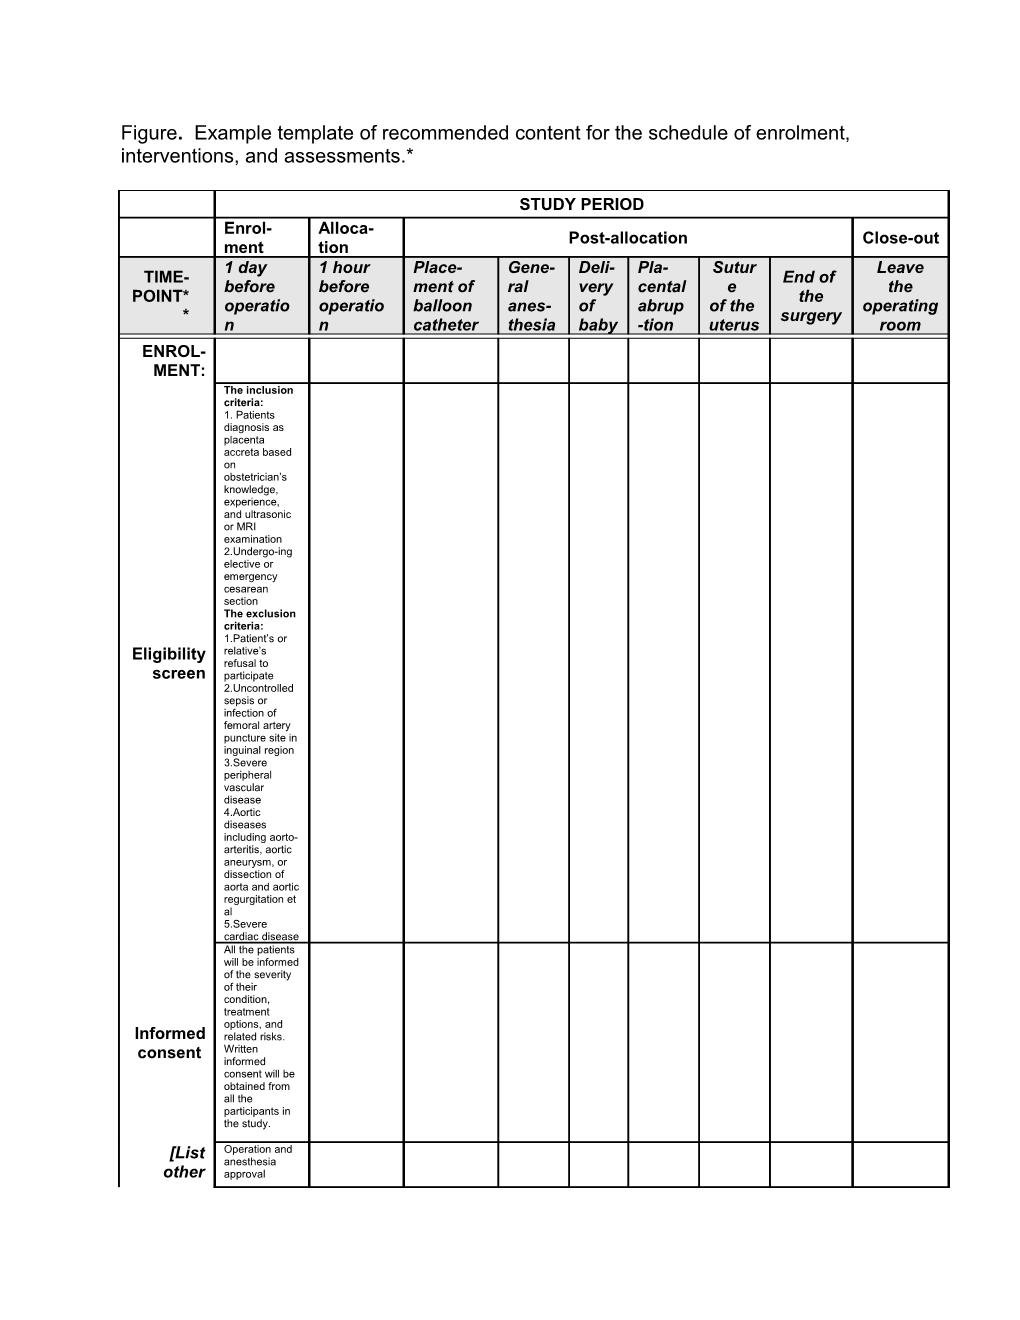 Figure. Example Template of Recommended Content for the Schedule of Enrolment, Interventions